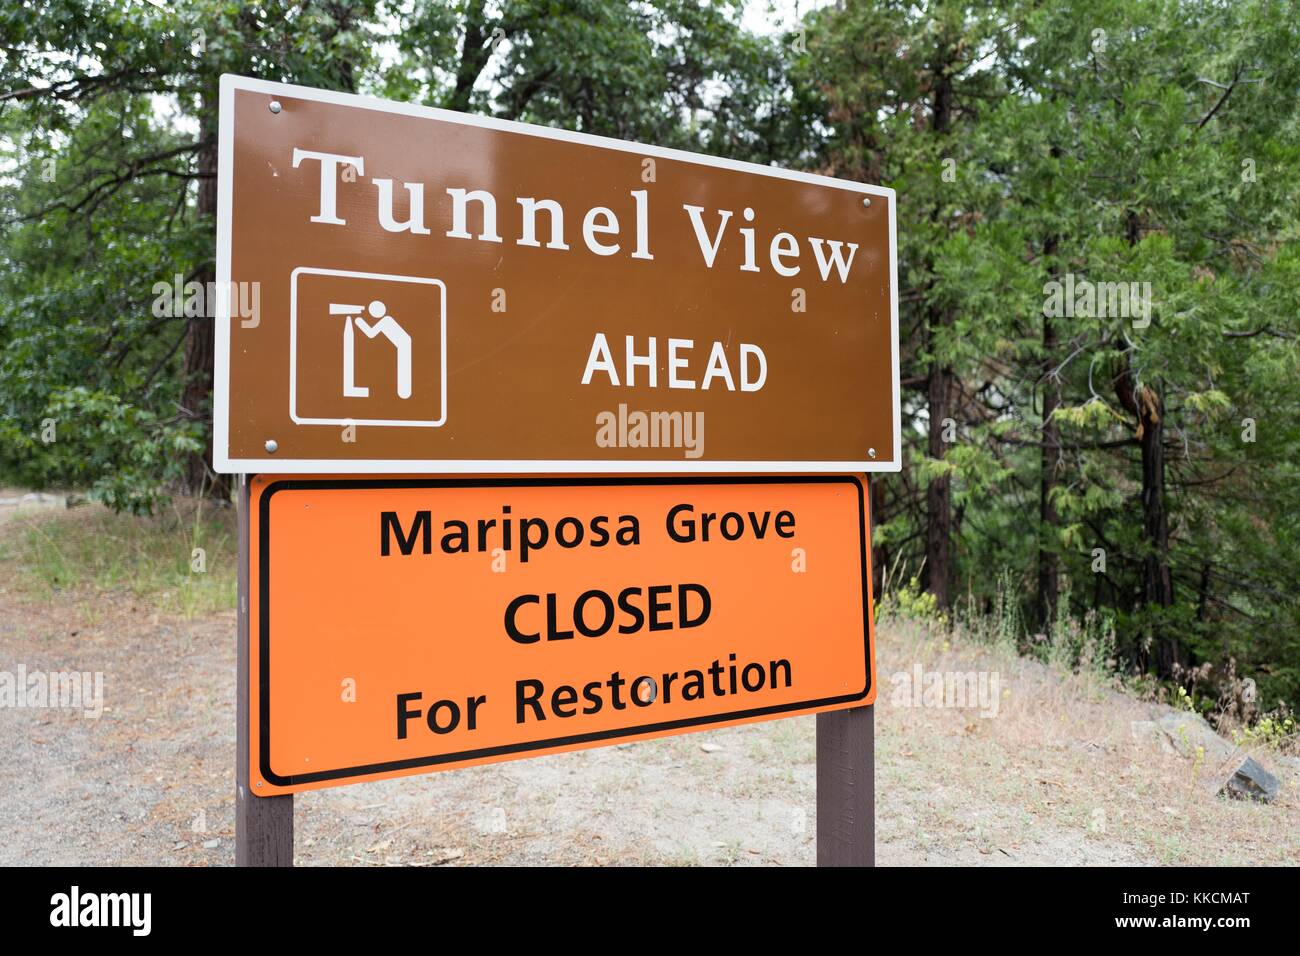 Sign for Tunnel View overlook in Yosemite National Park, with temporary sign announcing that the Mariposa Grove of giant sequoia redwood trees is closed, Yosemite Valley, California, 2016. Stock Photo